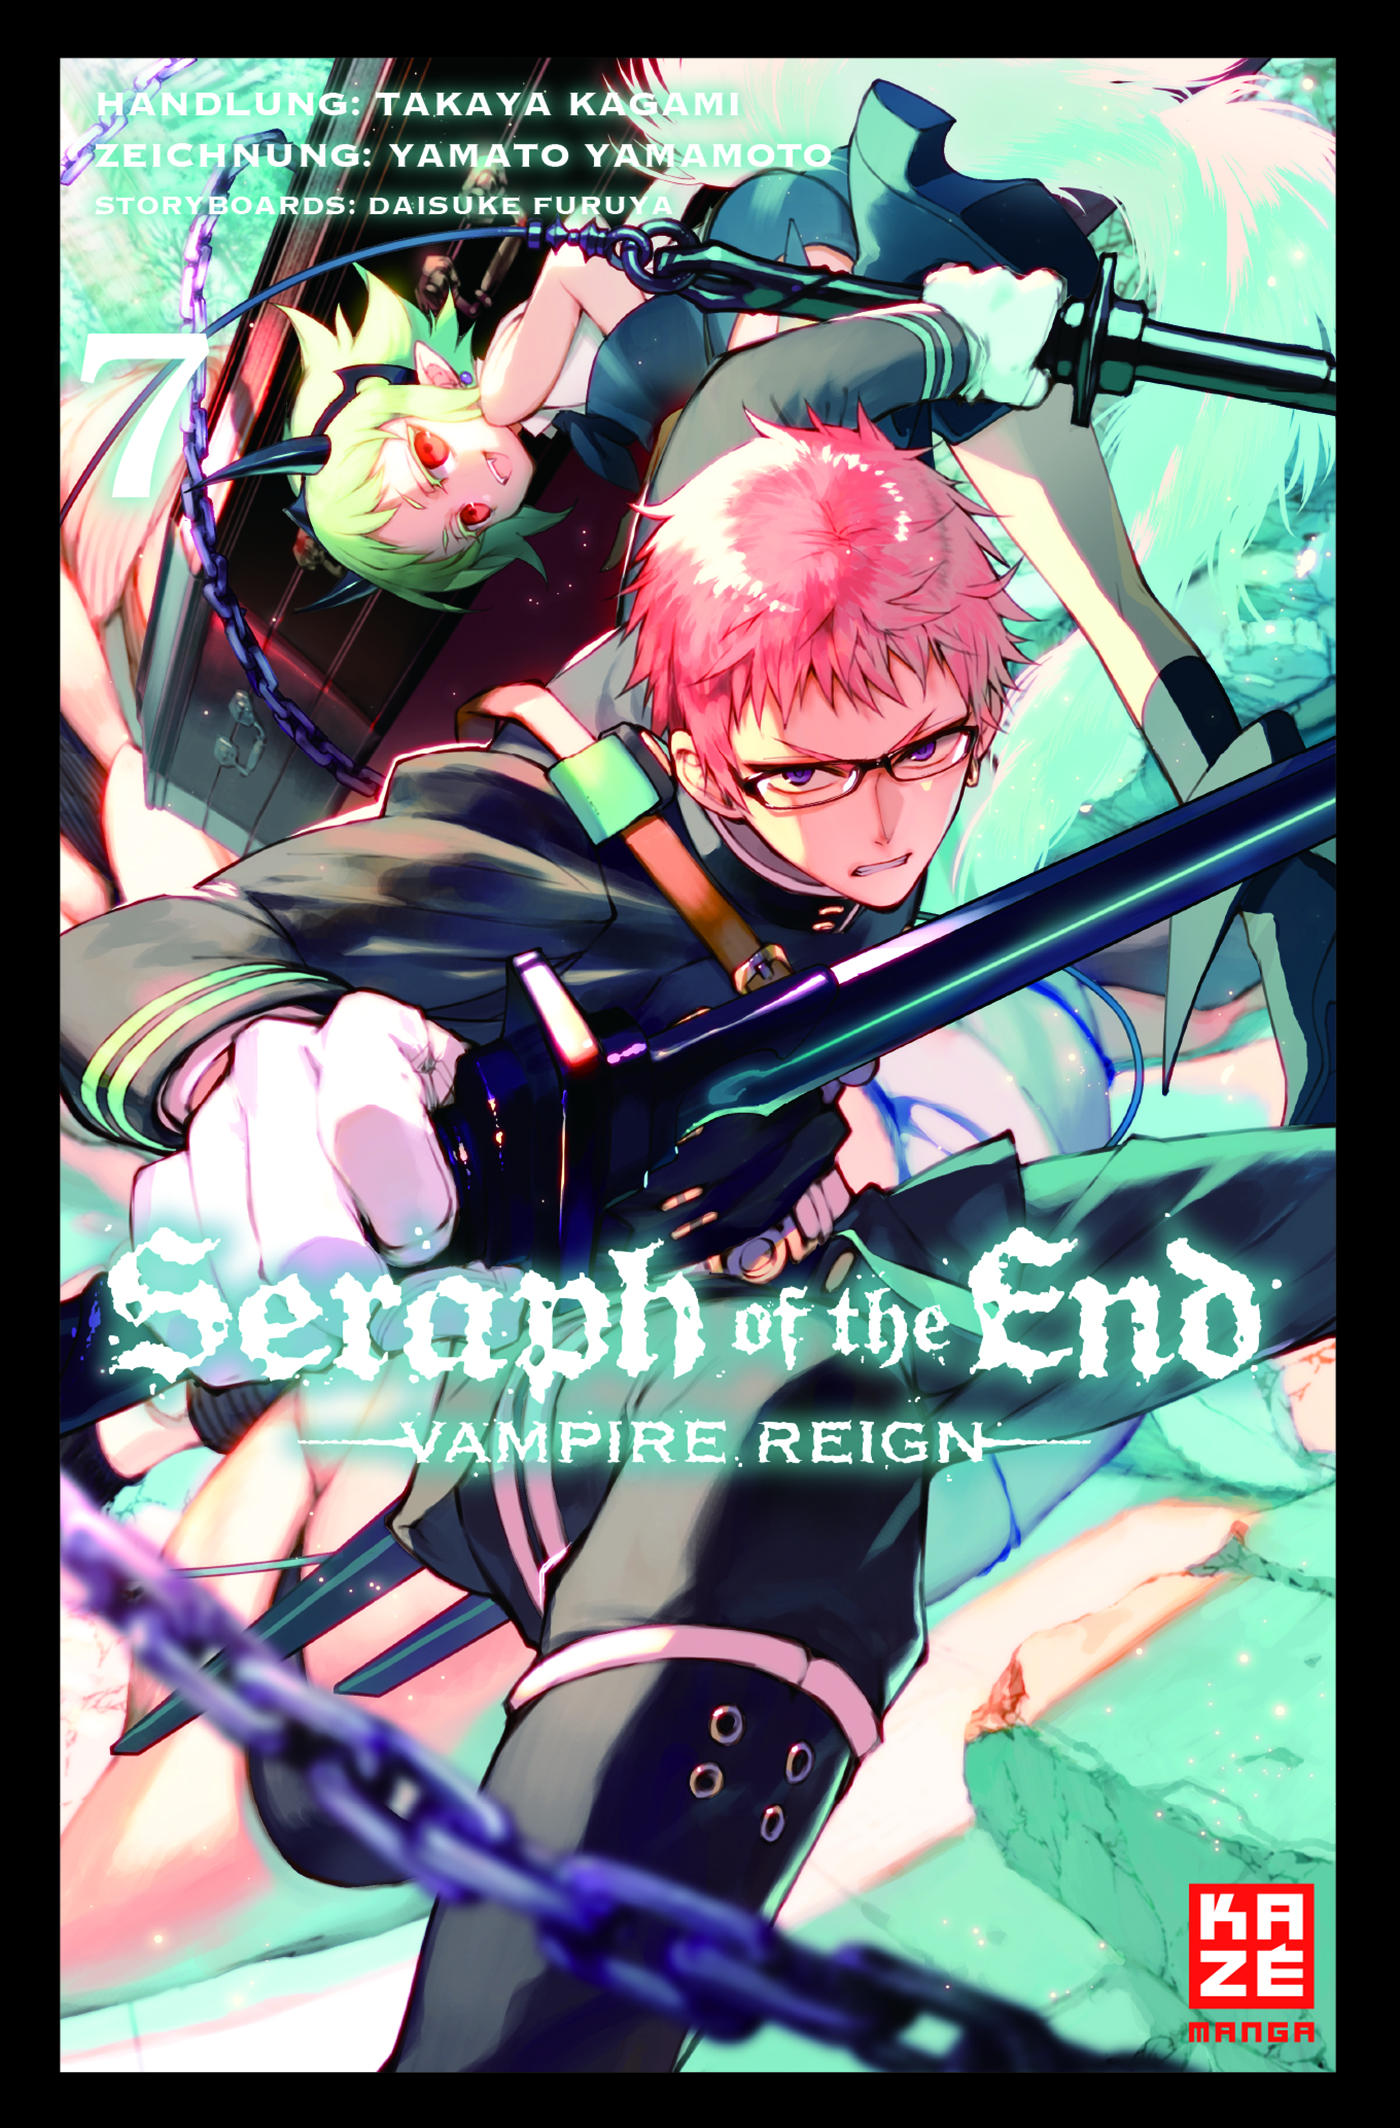 Seraph of the 7 - Band End